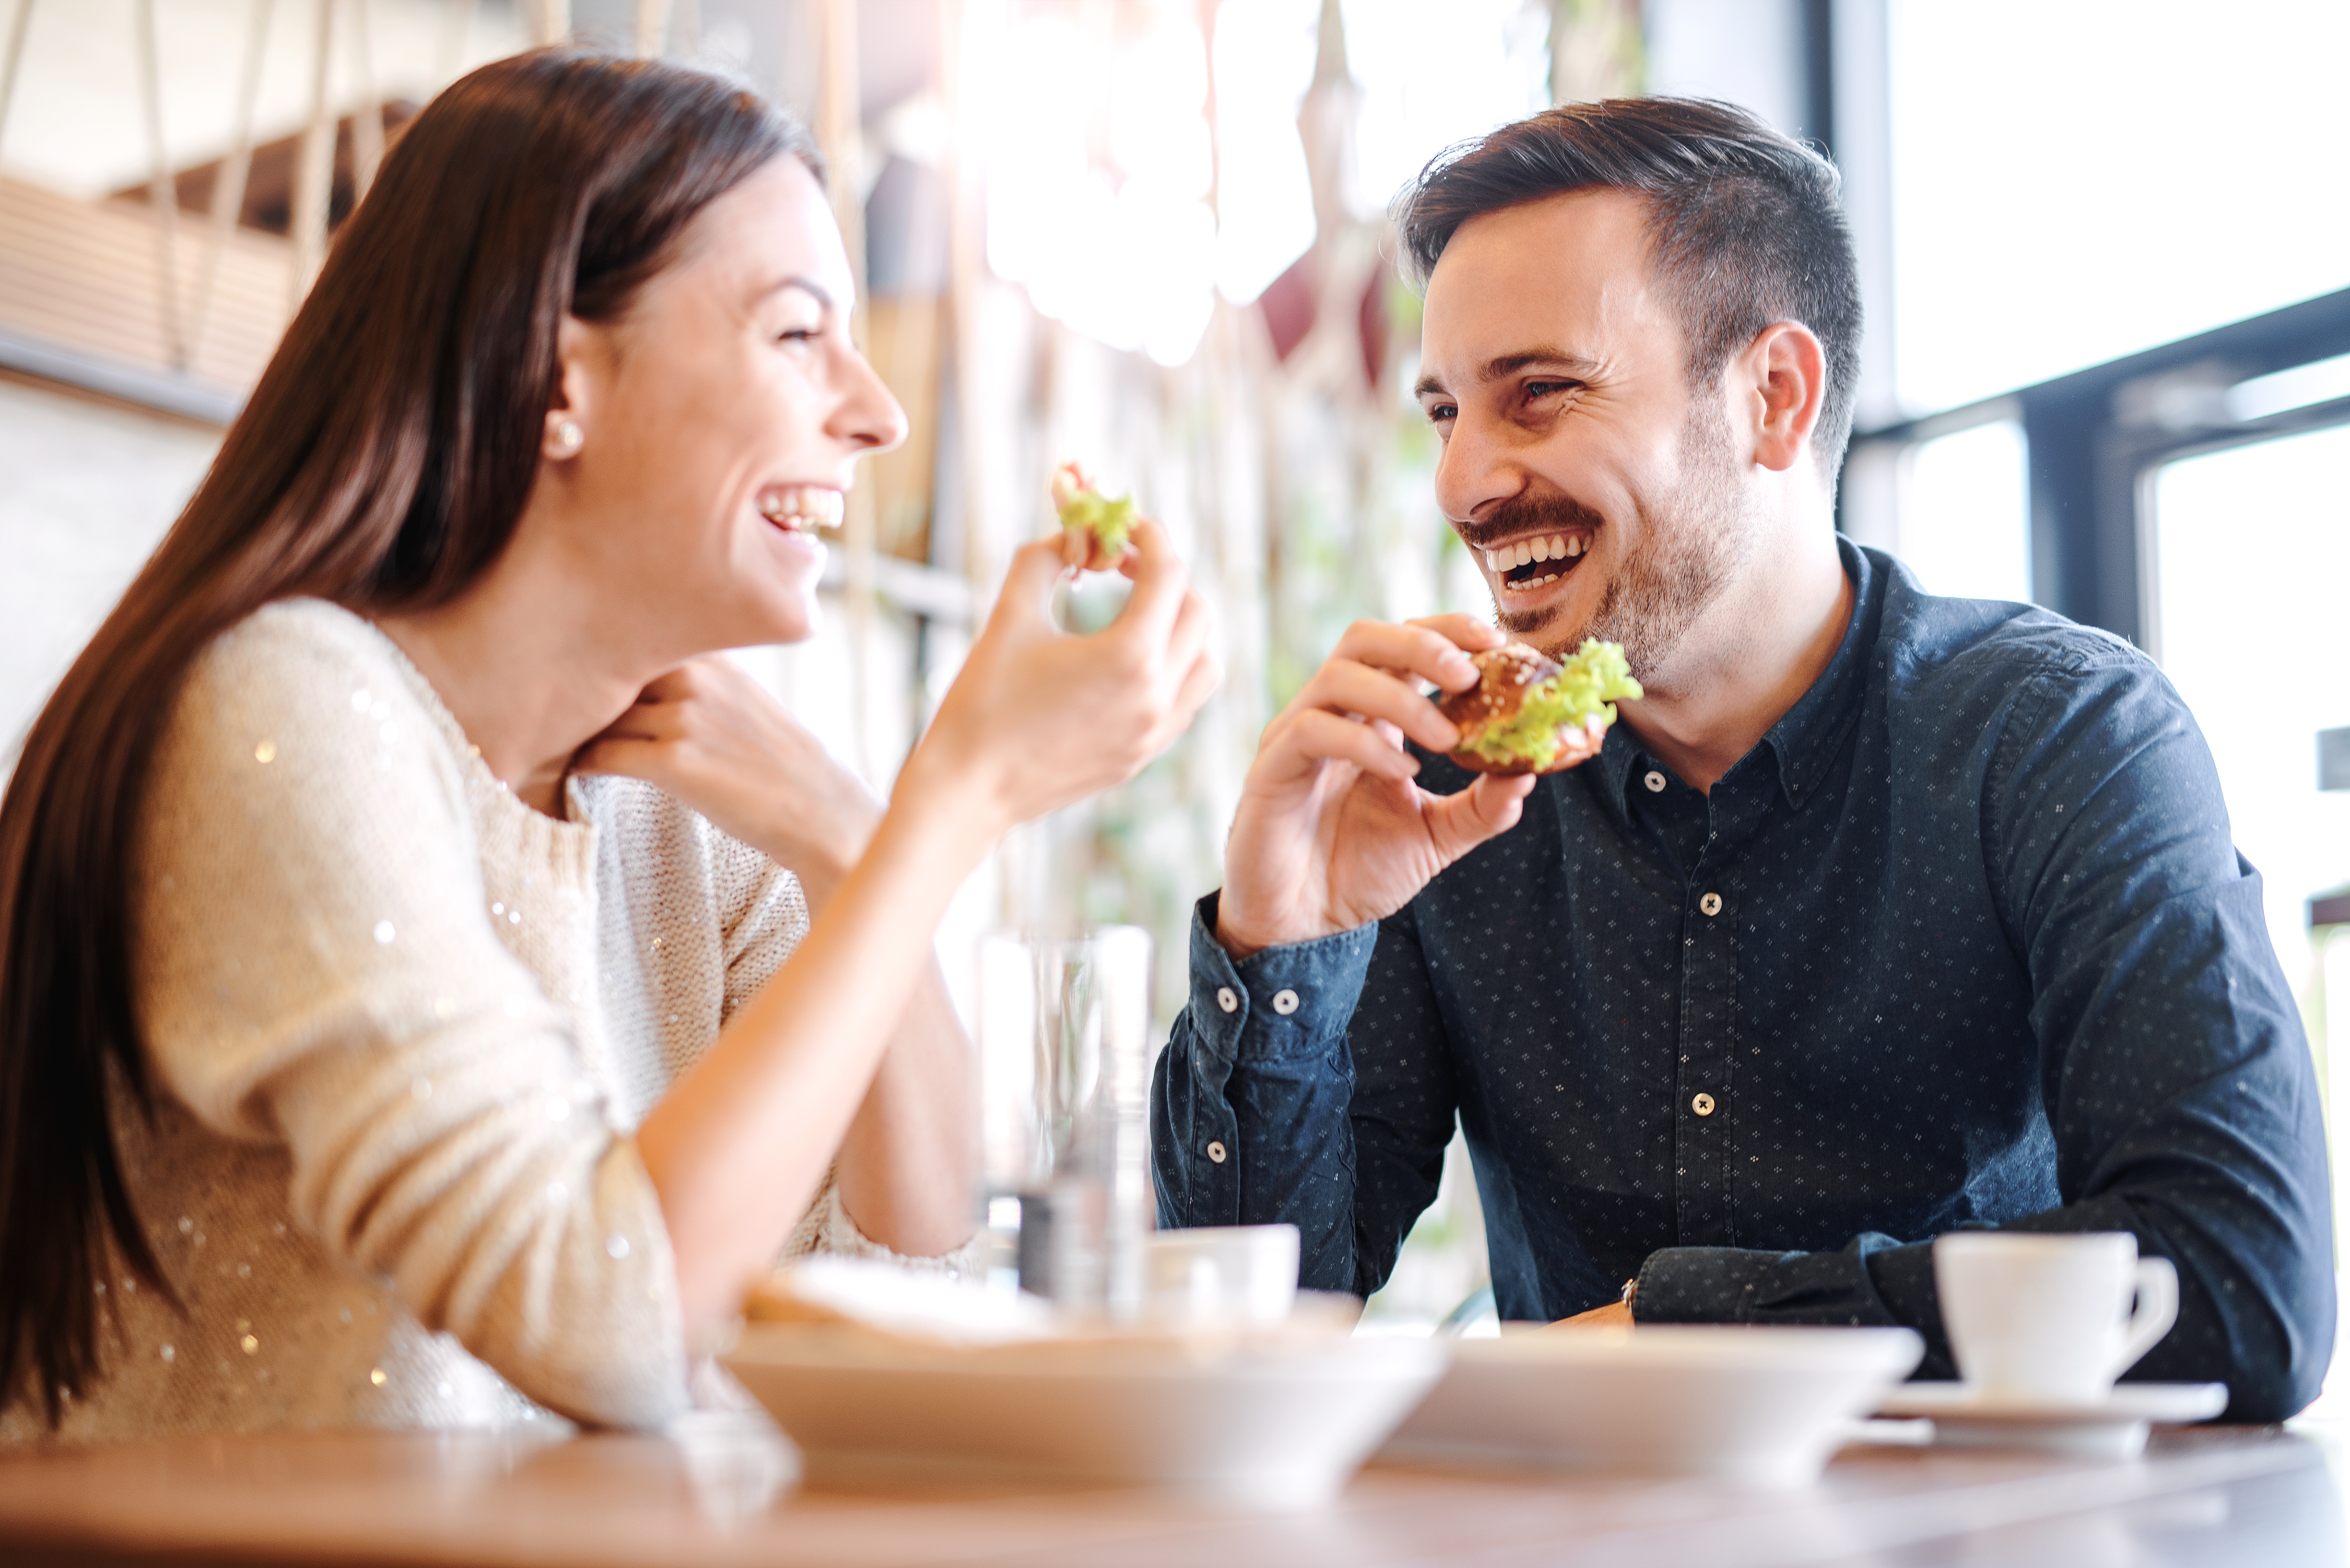 A happy couple enjoying food in a cafe | Source: Shutterstock